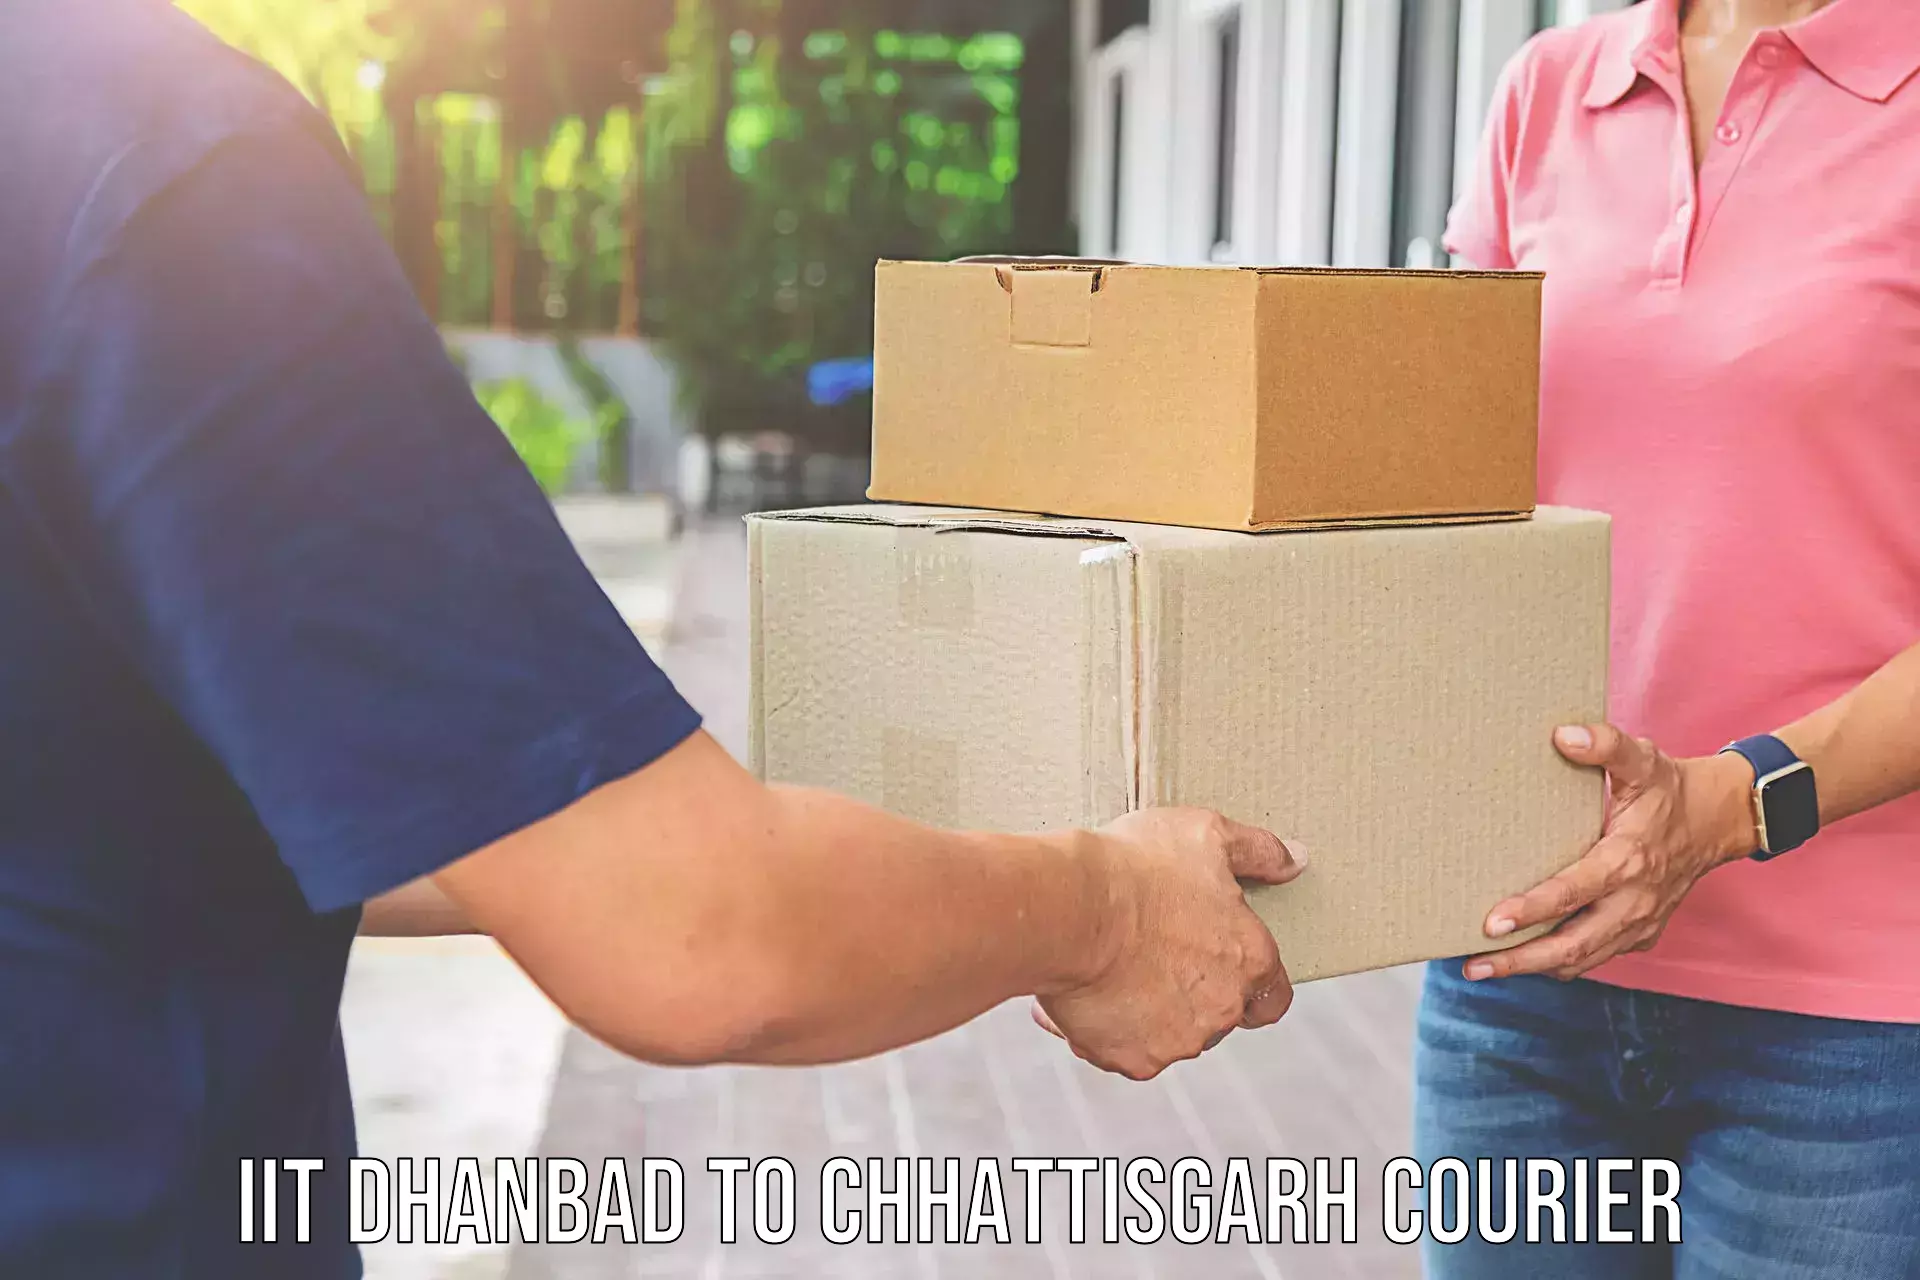 Quality relocation assistance IIT Dhanbad to Patna Chhattisgarh